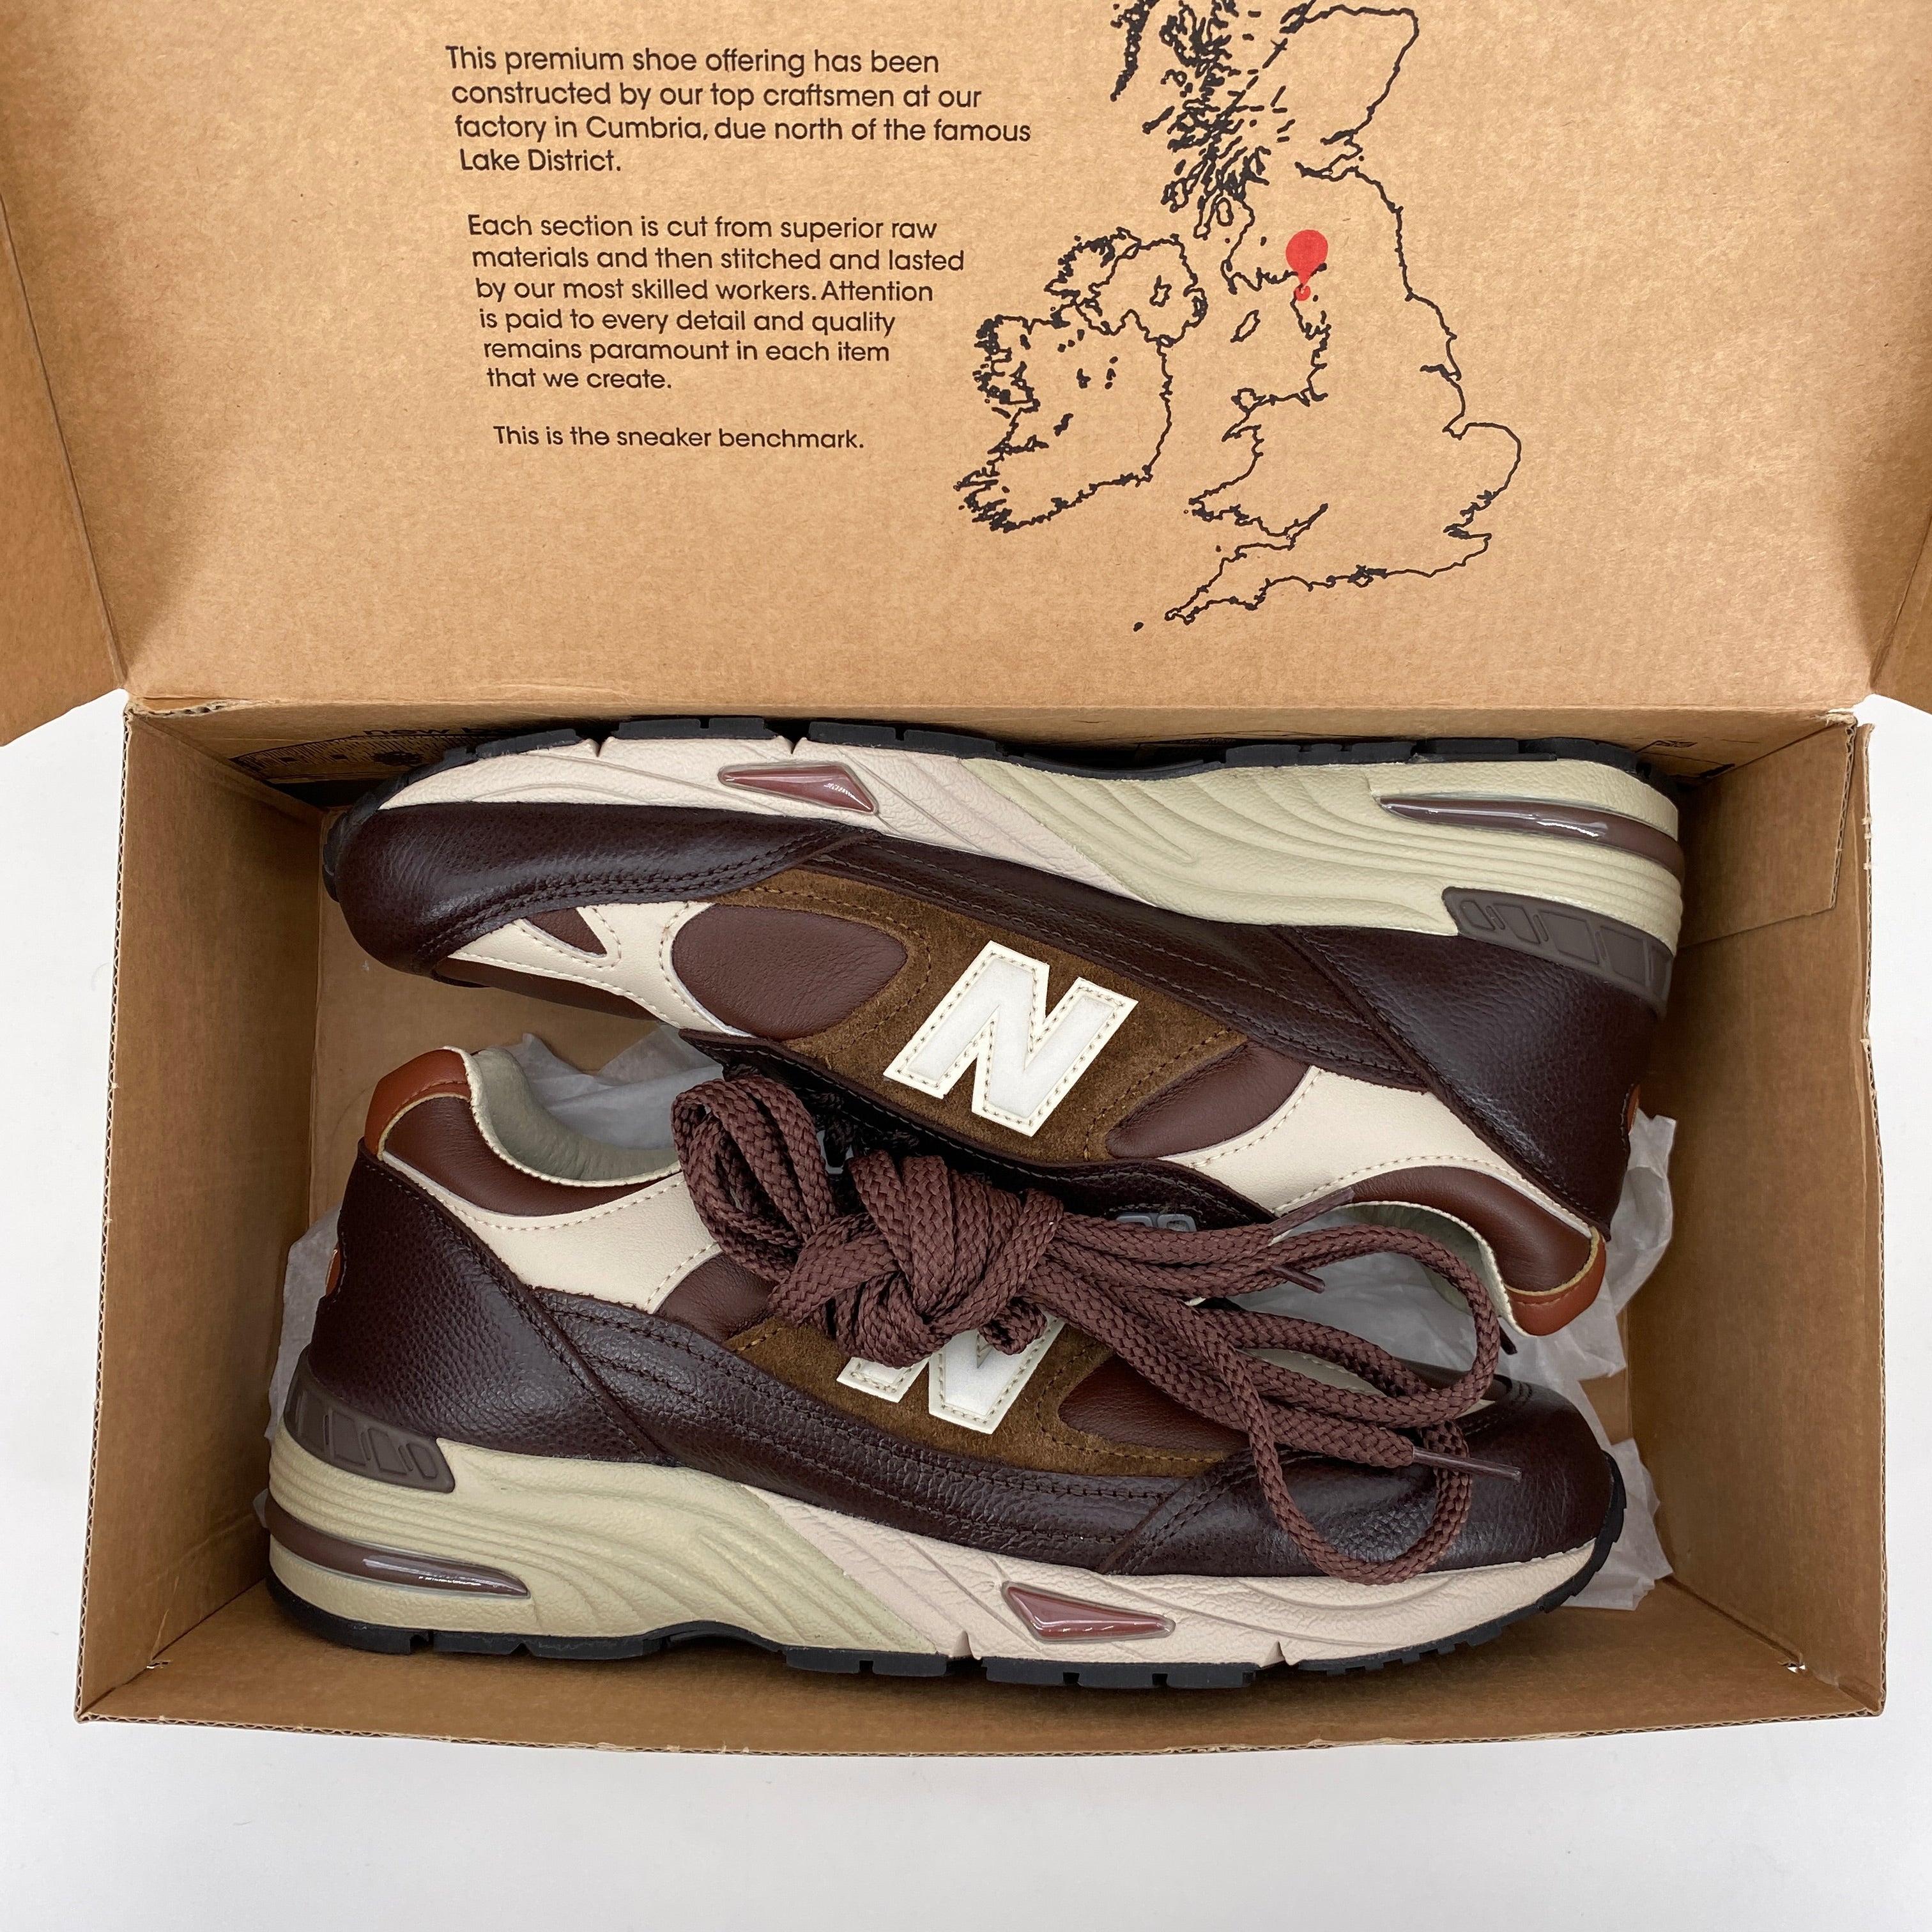 New Balance 991 &quot;French Roast&quot; 2022 New Size 7.5